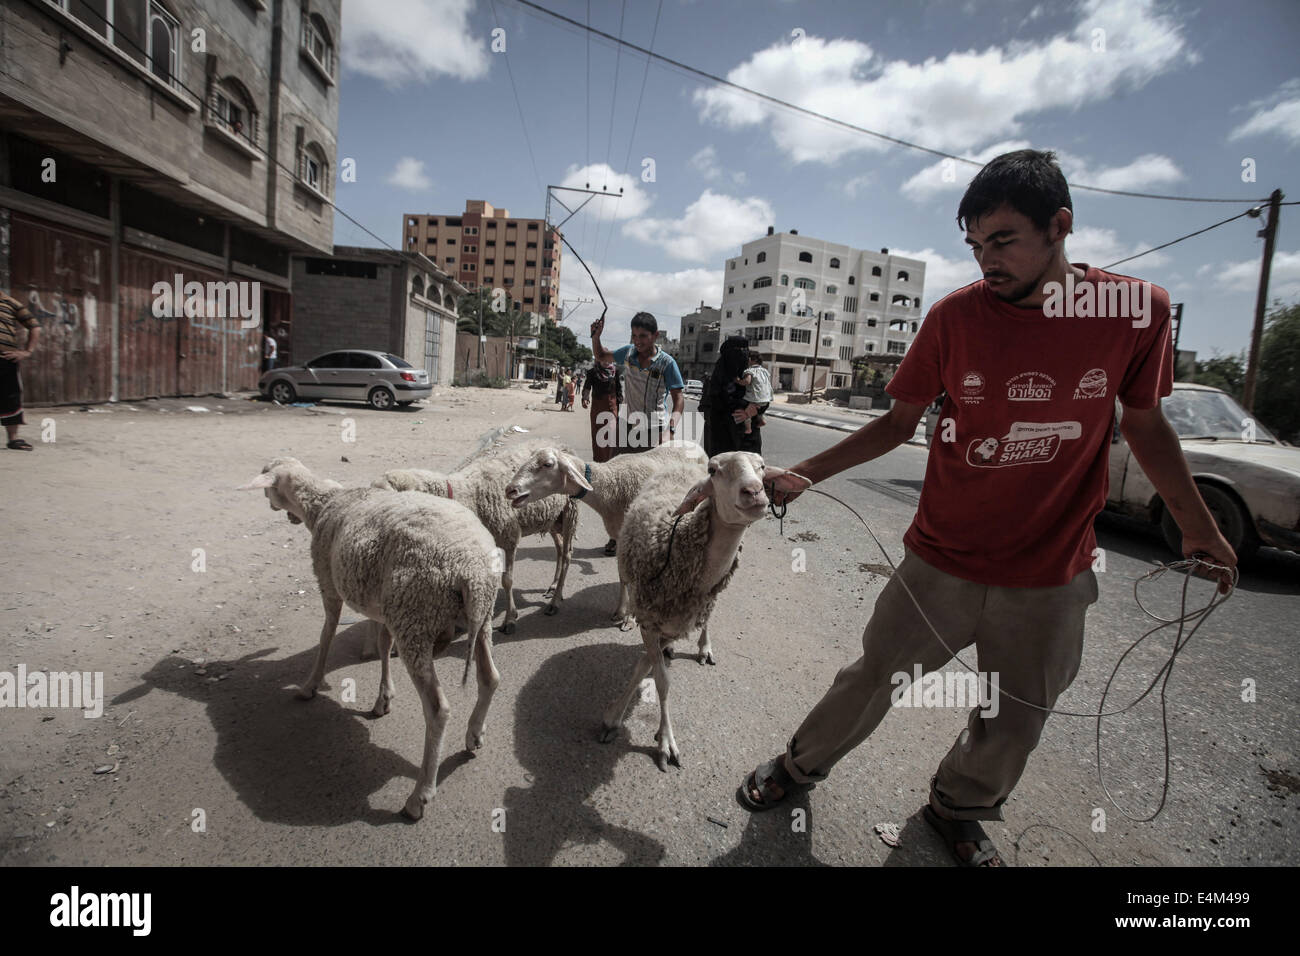 Gaza, Palestinian Territories. 13th July, 2014. A Palestinian man drives sheep, on July 13, 2014, in Gaza. Israeli marines mounted a first ground assault on Gaza, further escalating a deadly six-day offensive hours after the UN Security Council unanimously called for a ceasefire. Credit:  Momen Faiz/NurPhoto/ZUMA Wire/Alamy Live News Stock Photo